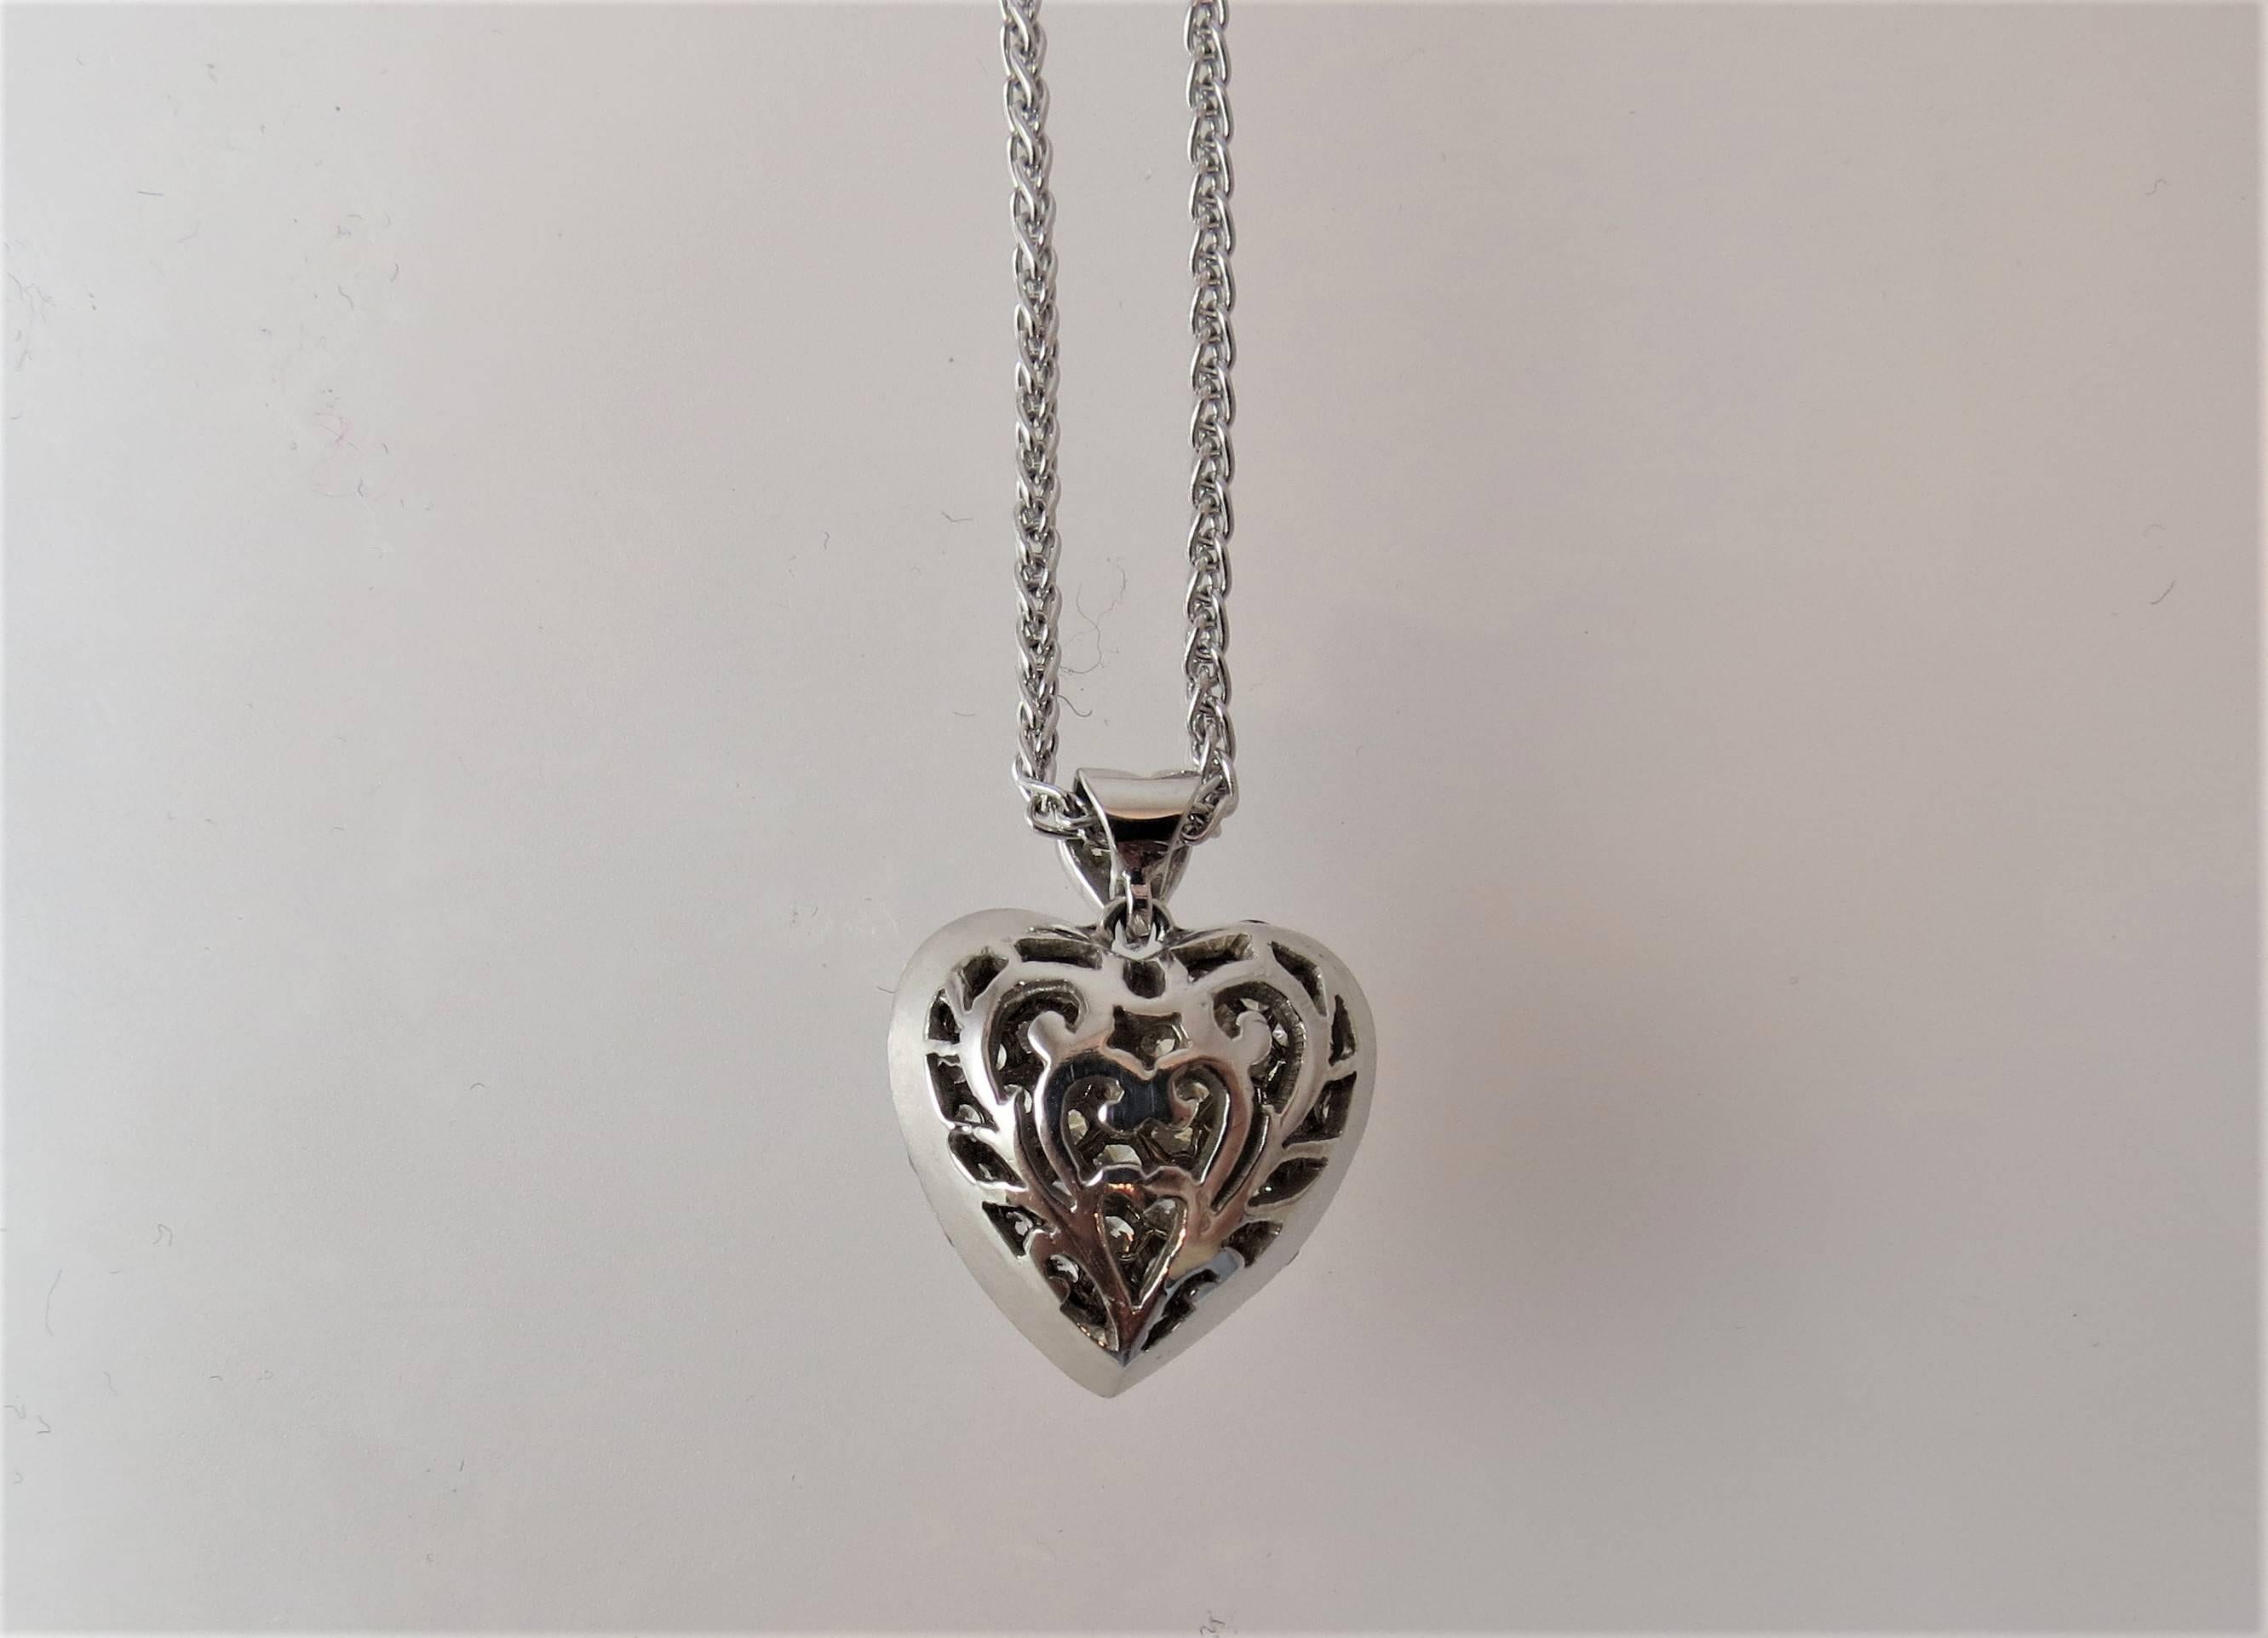 Beautiful 18K white gold diamond double heart pendant, set with 56 full cut round diamonds weighing 1.28cts total, suspended from diamond bale and 17 inch white gold chain